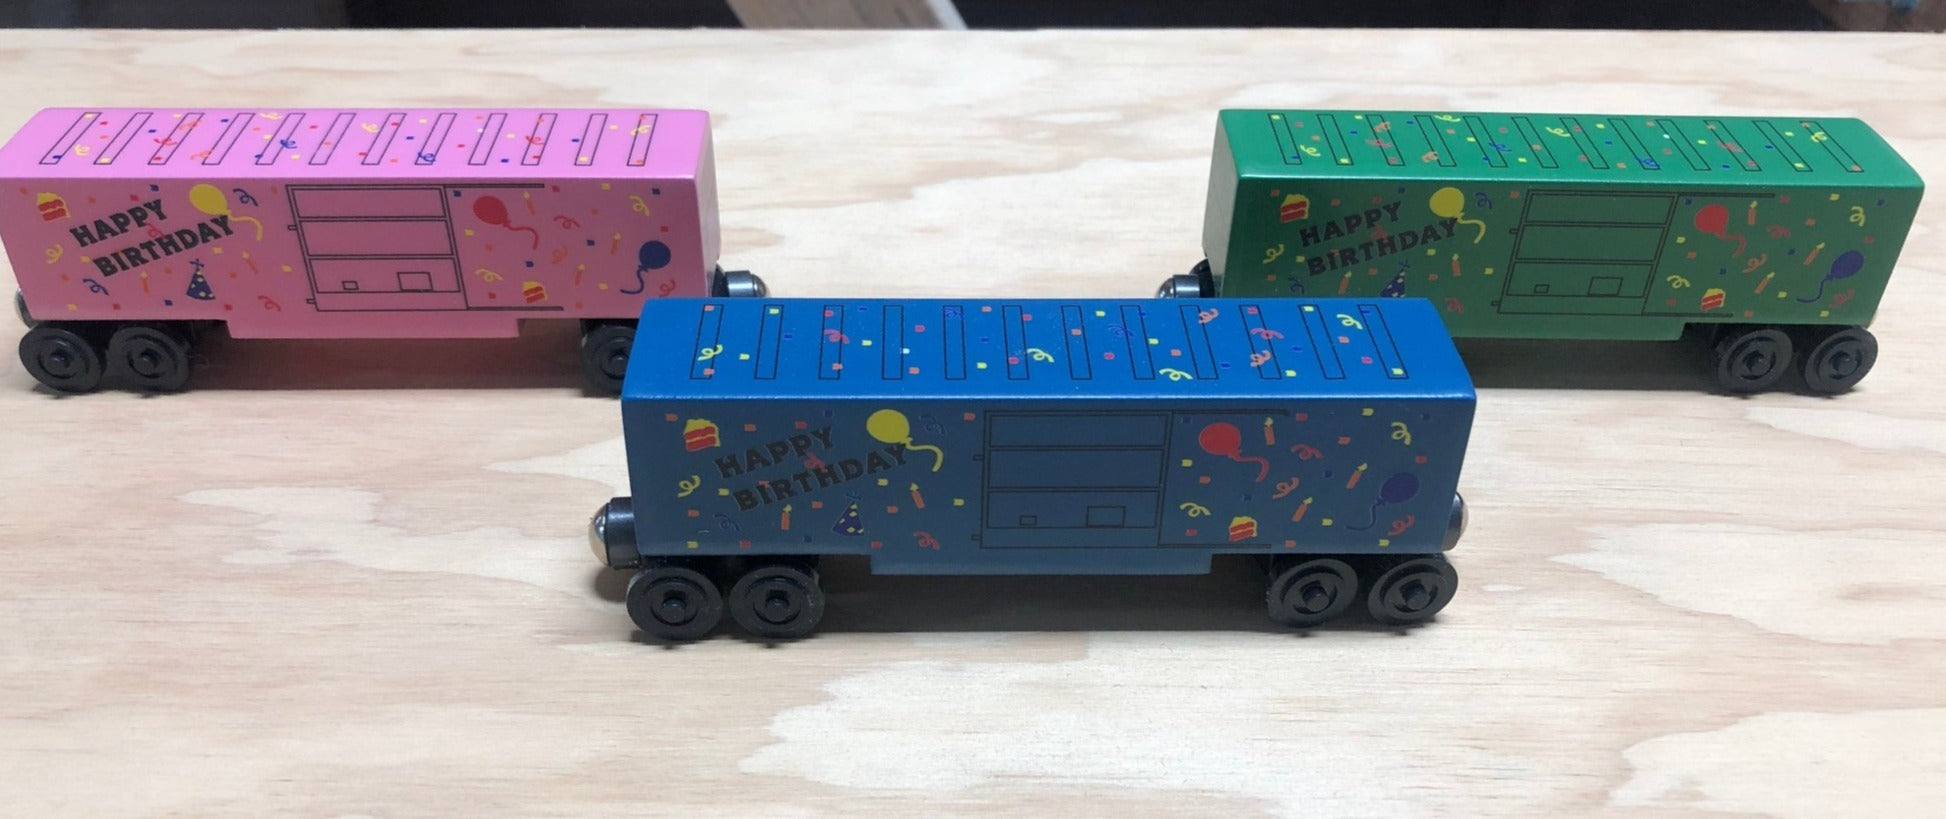 Birthday Toy Train Boxcars by Whittle Shortline Railroad